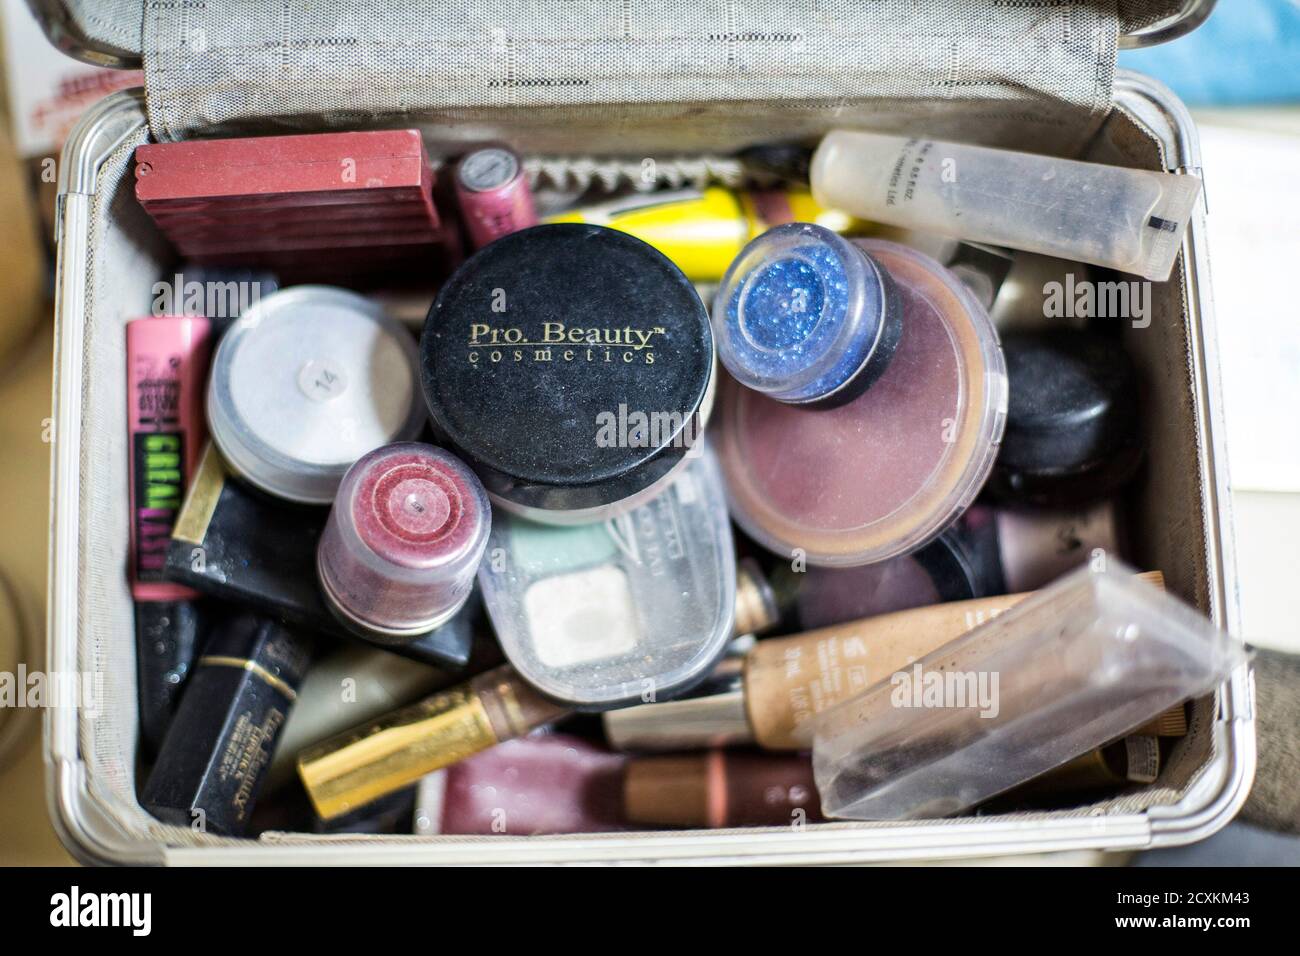 A make-up case is seen backstage before a drag show in Tel Aviv June 9, 2014. The show is part of the city's gay pride week, ending on June 13 with the Gay Pride Parade. Picture taken June 9, 2014. REUTERS/Baz Ratner (ISRAEL - Tags: SOCIETY ENTERTAINMENT) Stock Photo